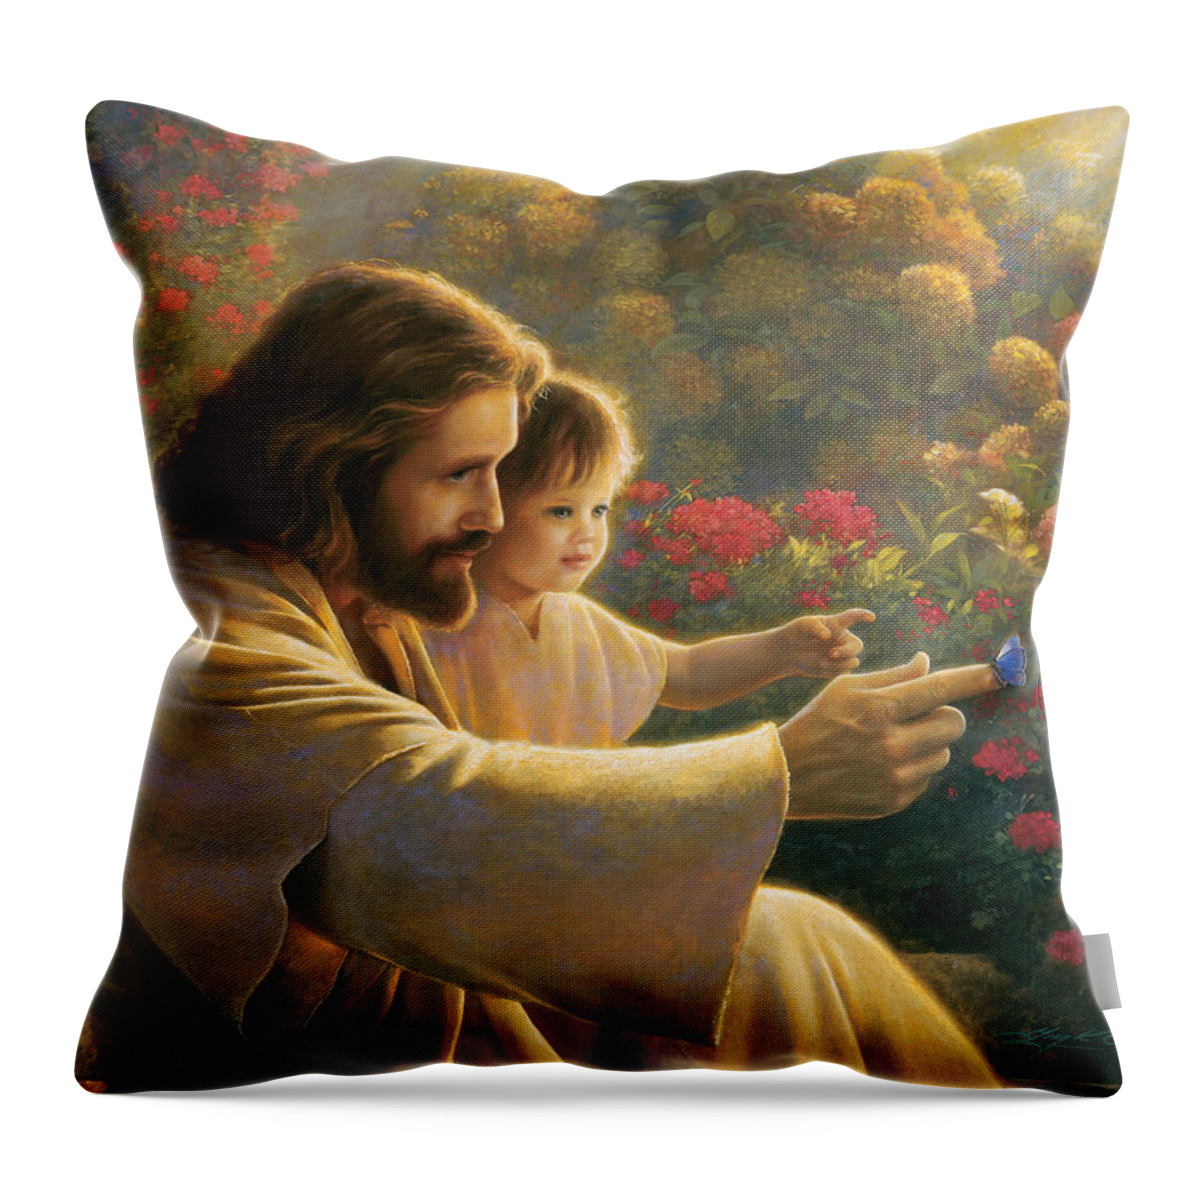 Jesus Throw Pillow featuring the painting Precious In His Sight by Greg Olsen